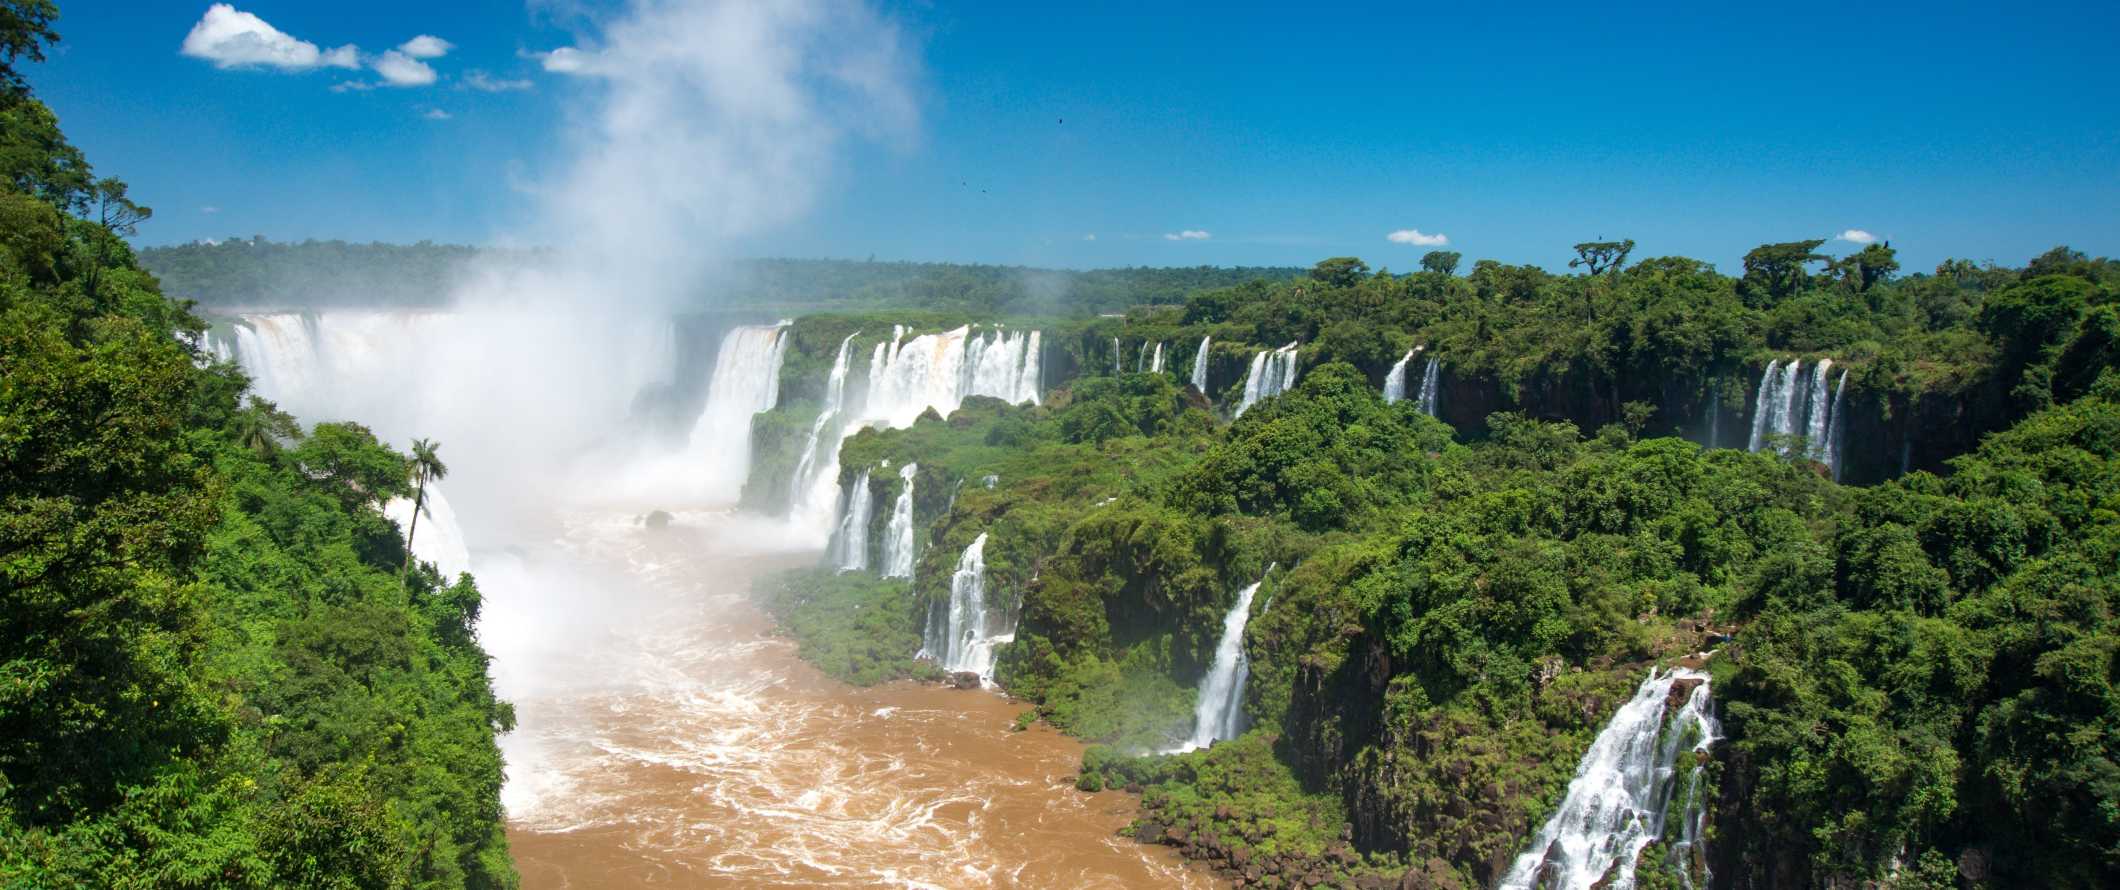 The waterfalls of Iguazu Falls, surrounded by lush greenery, in Argentina